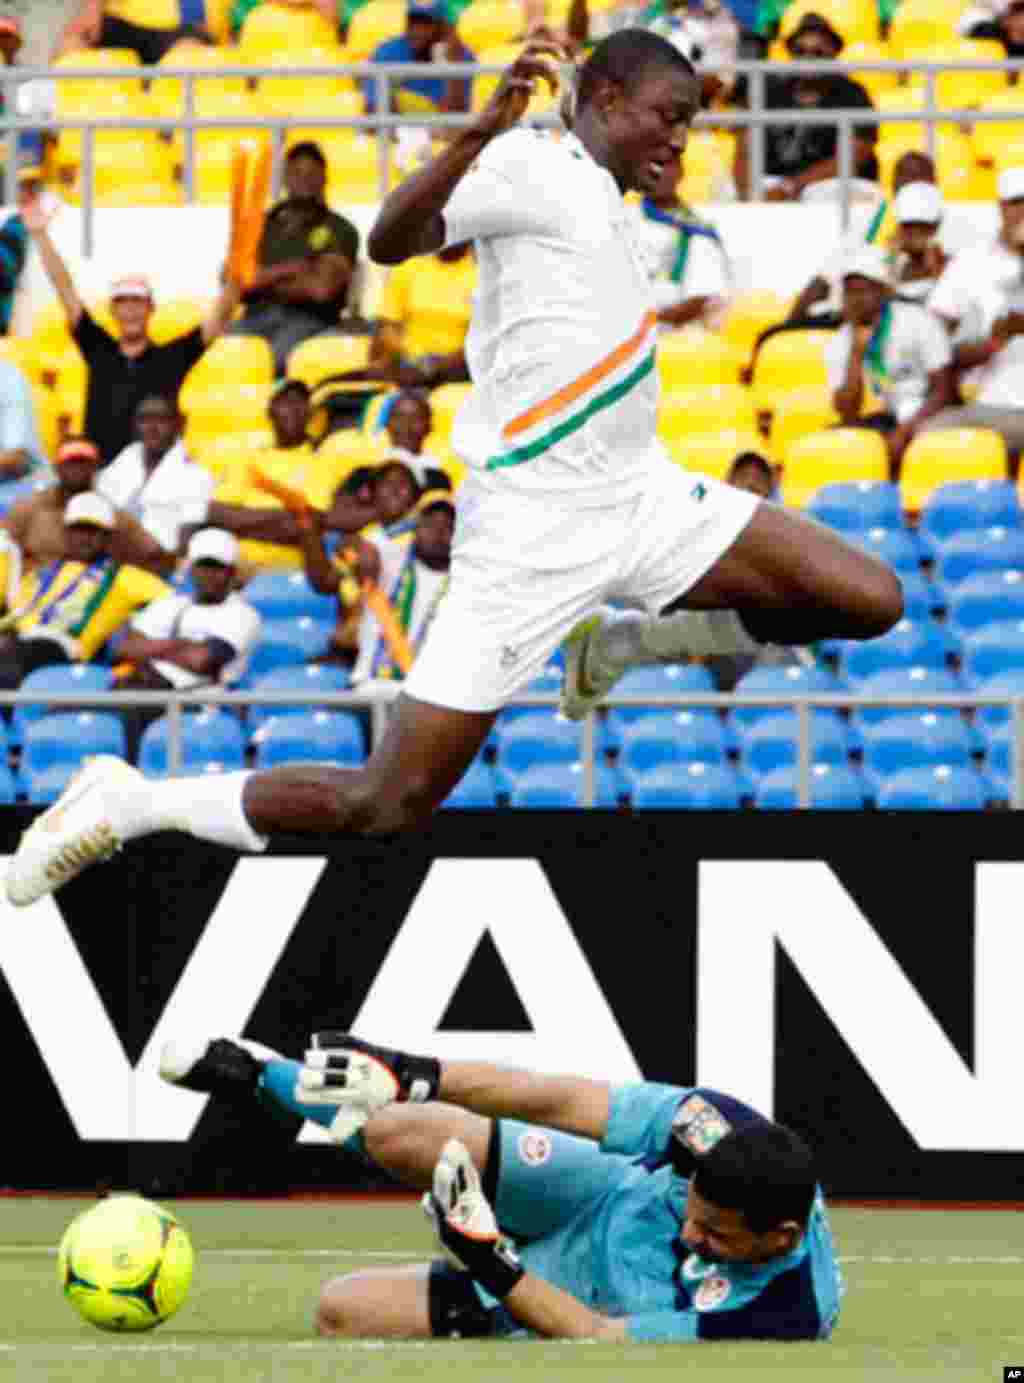 Niger's Moussa jumps over Tunisia's Ayem during their African Cup of Nations soccer match in Libreville